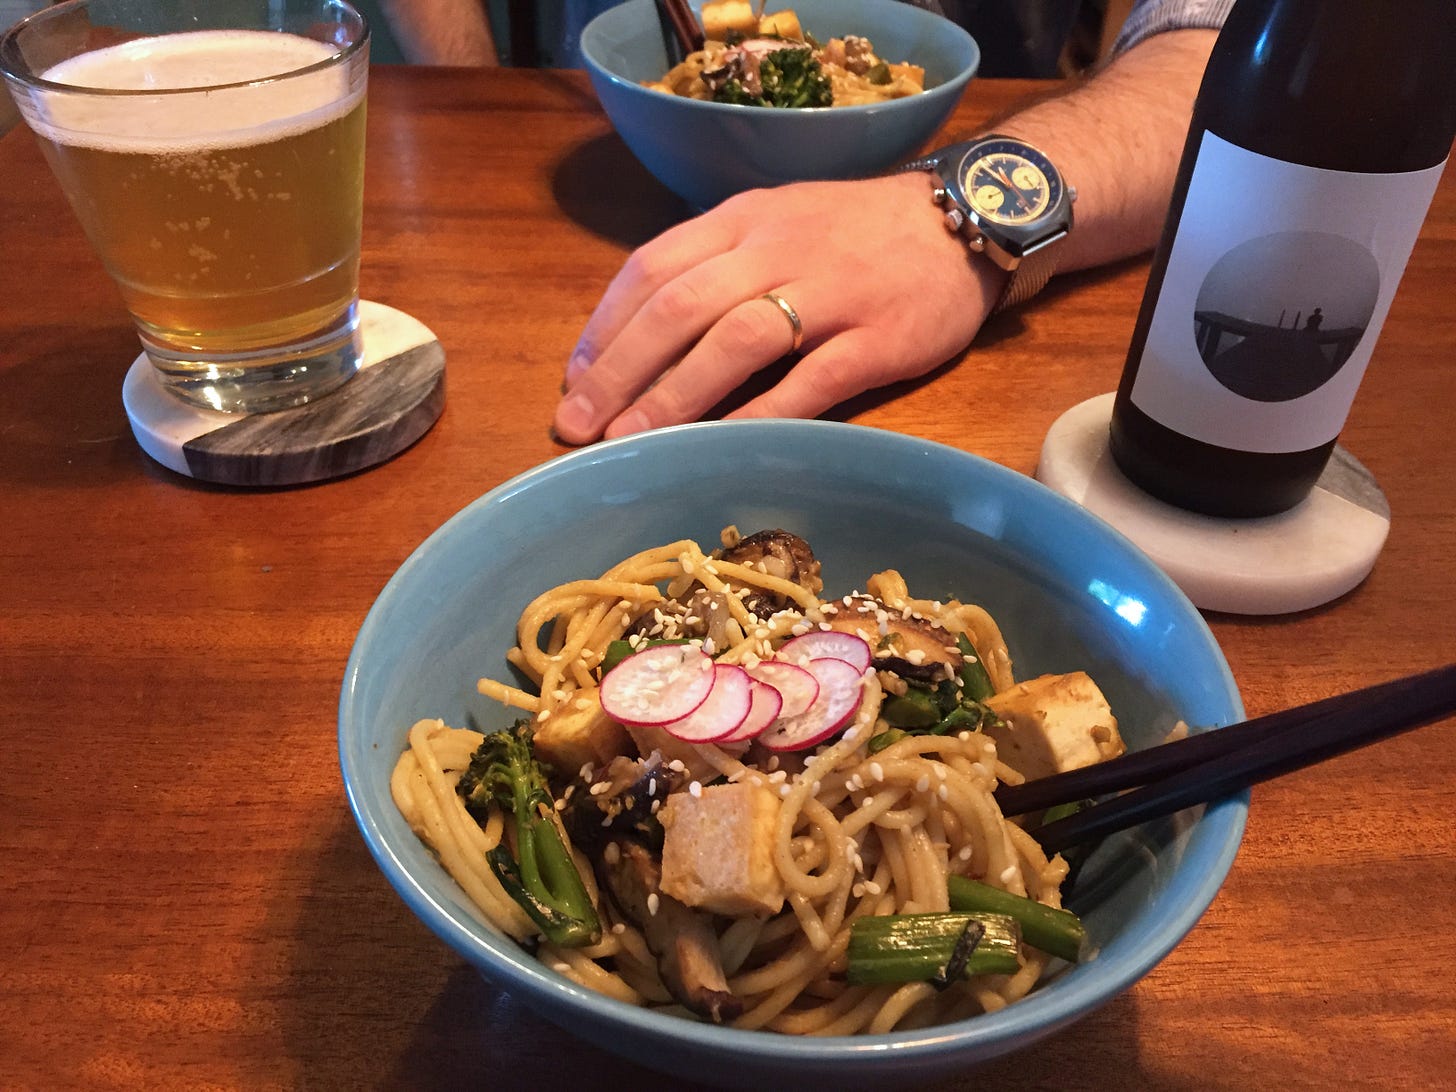 two blue bowls full of curried noodles with squares of tofu, pieces of broccolini, and mushroom slices. On top are sesame seeds and slices of red radish. A bottle of beer and a glass of beer sit at the respective corners of the bowls.